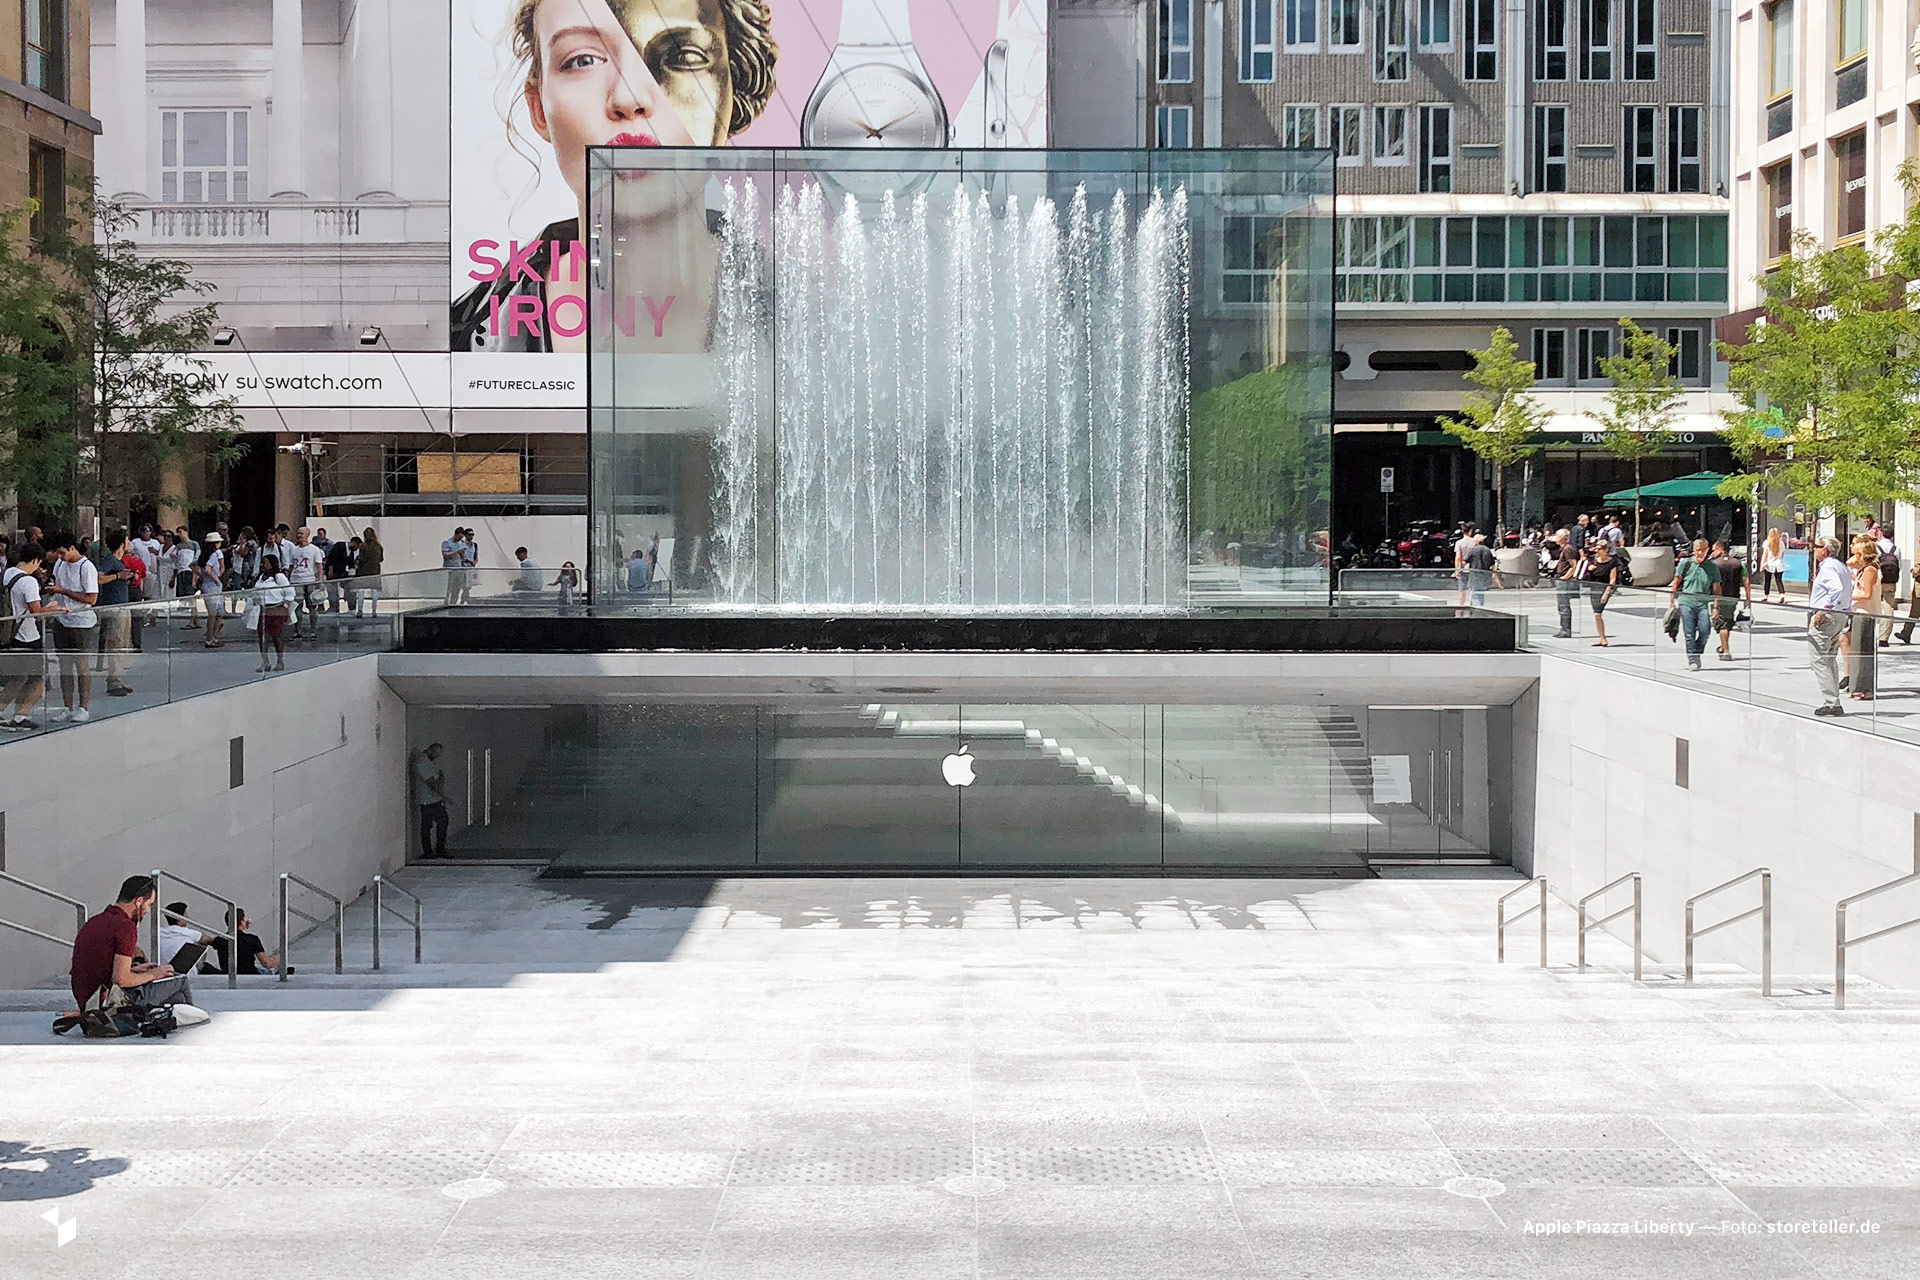 Apple Piazza Liberty in Mailand